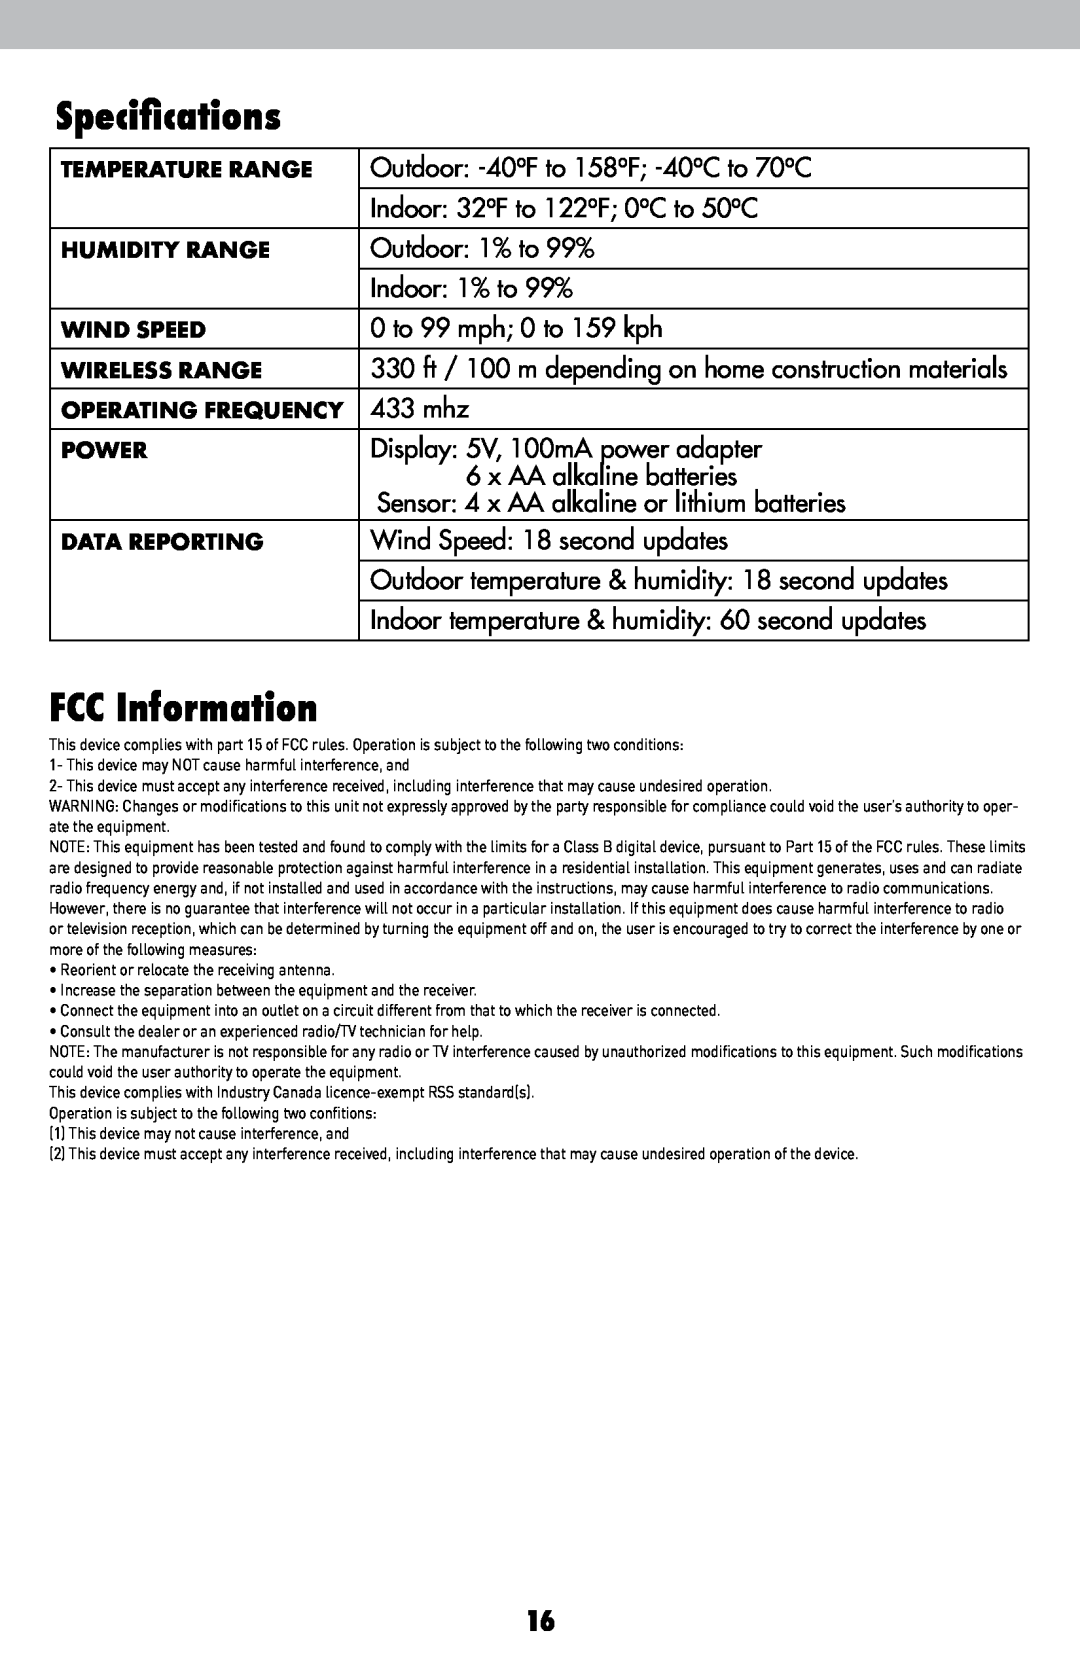 Acu-Rite 589 instruction manual Specifications, FCC Information 